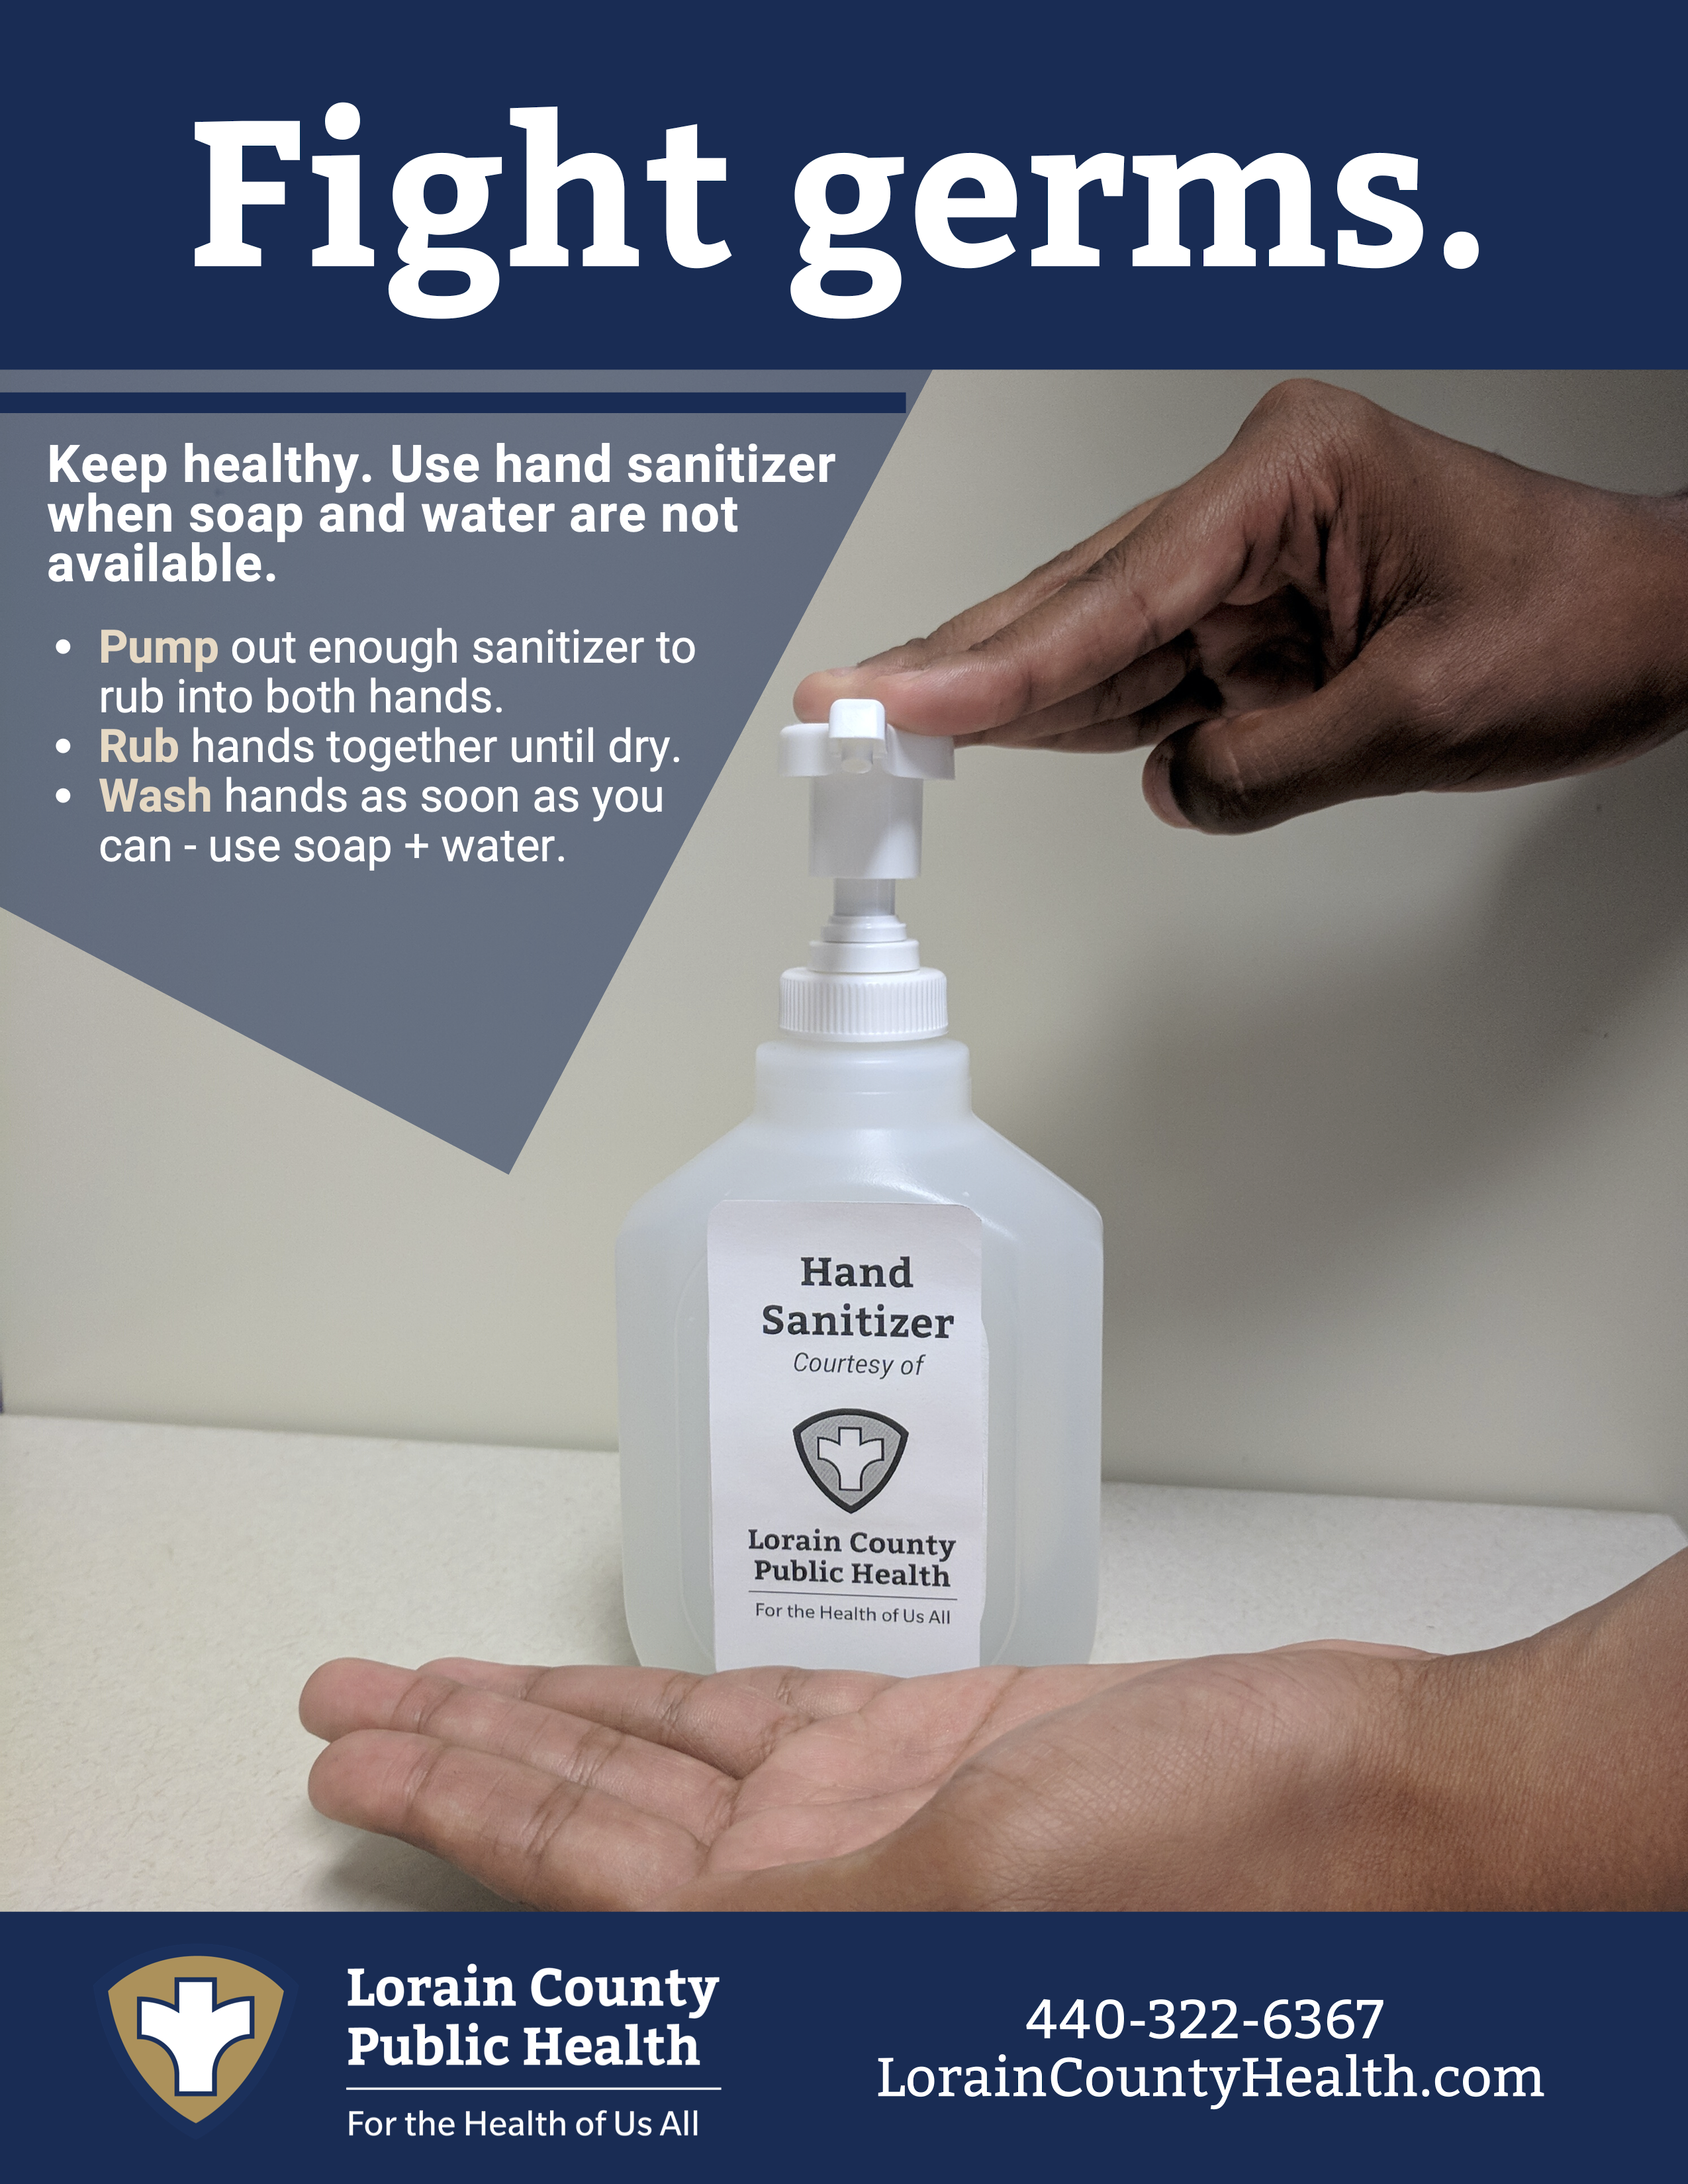 Want to stay well? Wash your hands, UCI Health